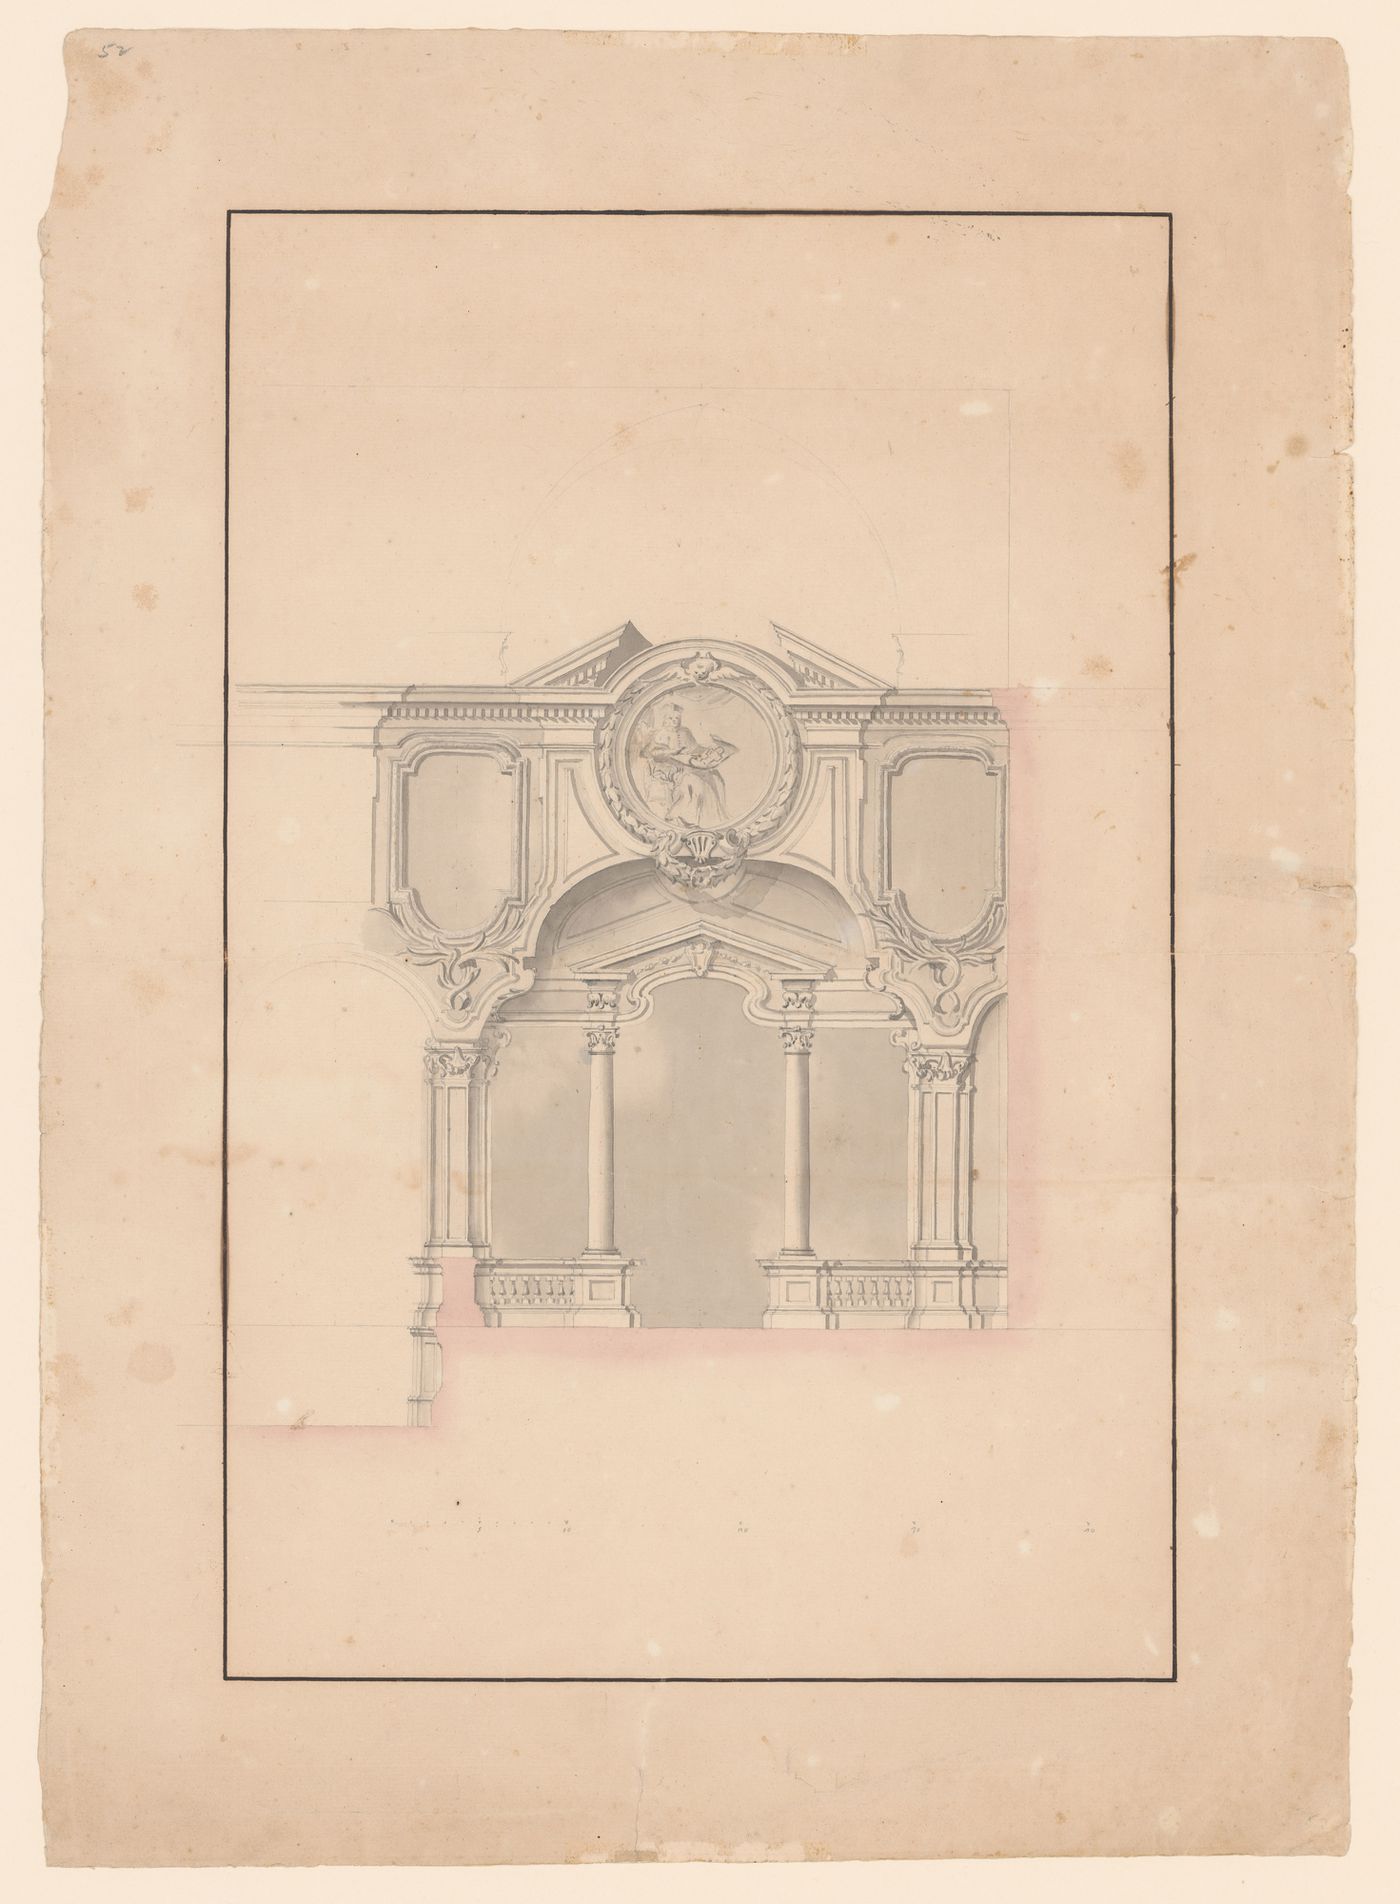 Section for San Marco, Rome, showing the interior decoration of the presbytery wall